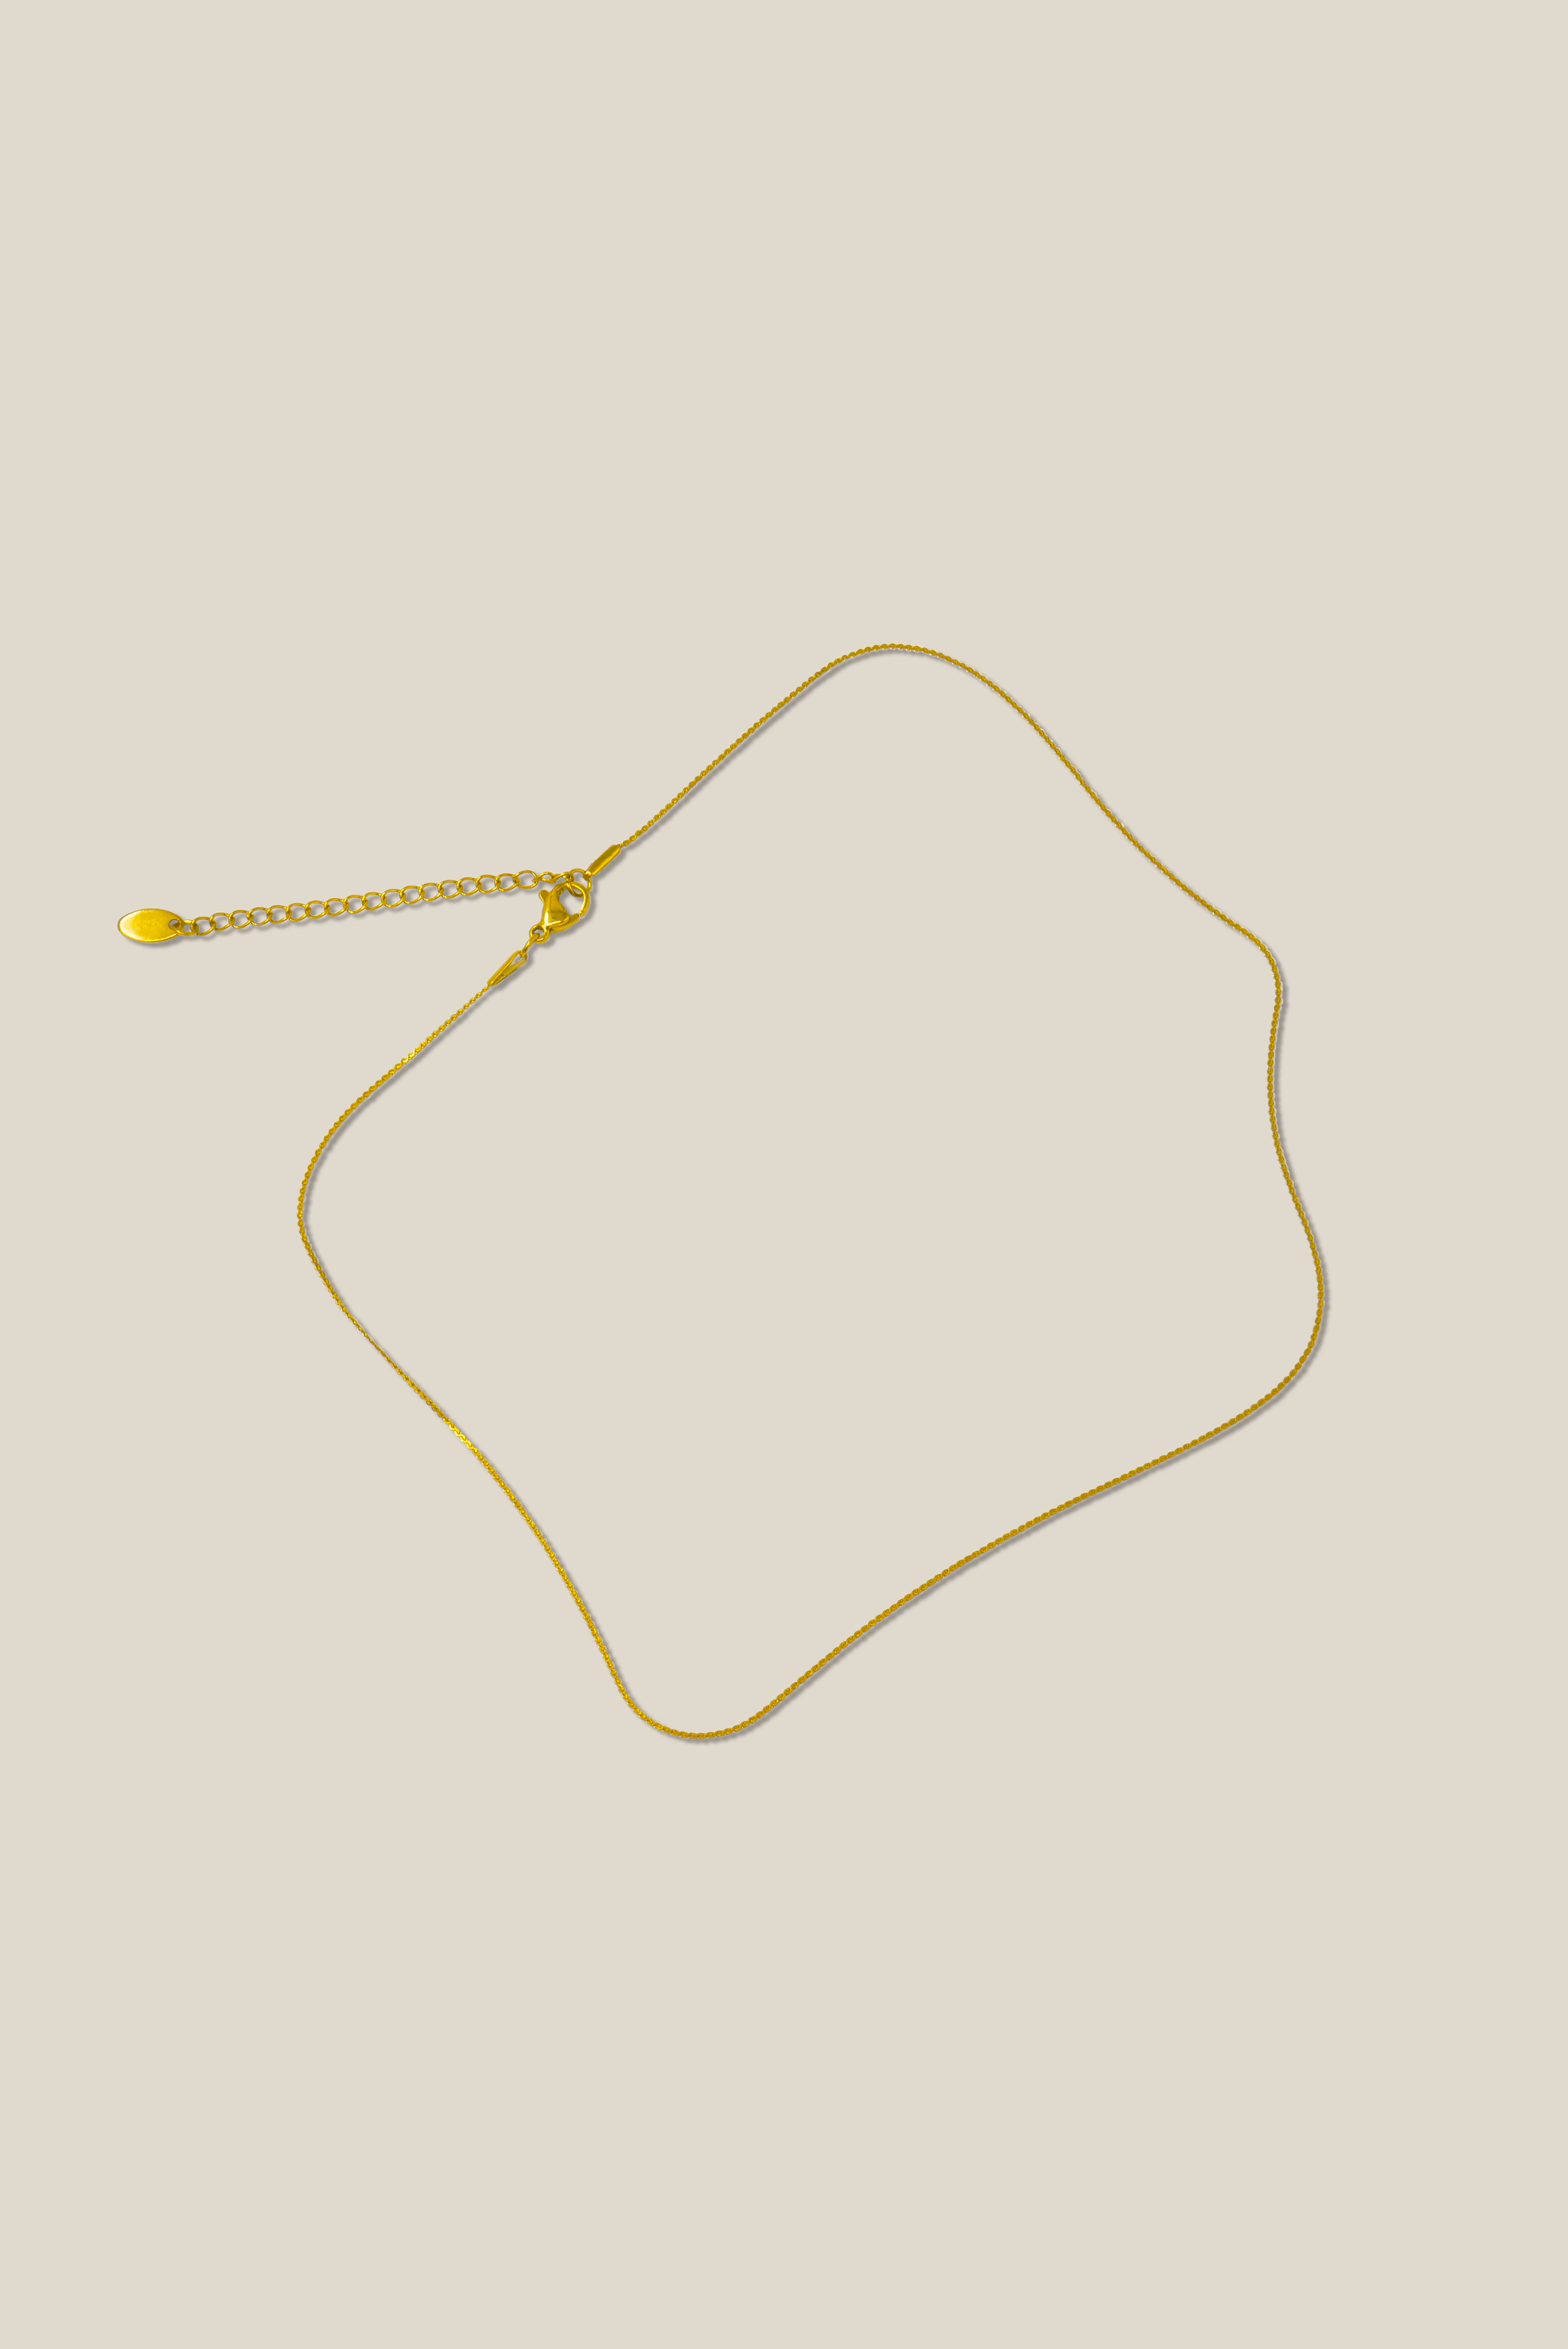 0.5mm snake chain (NECKLACE)